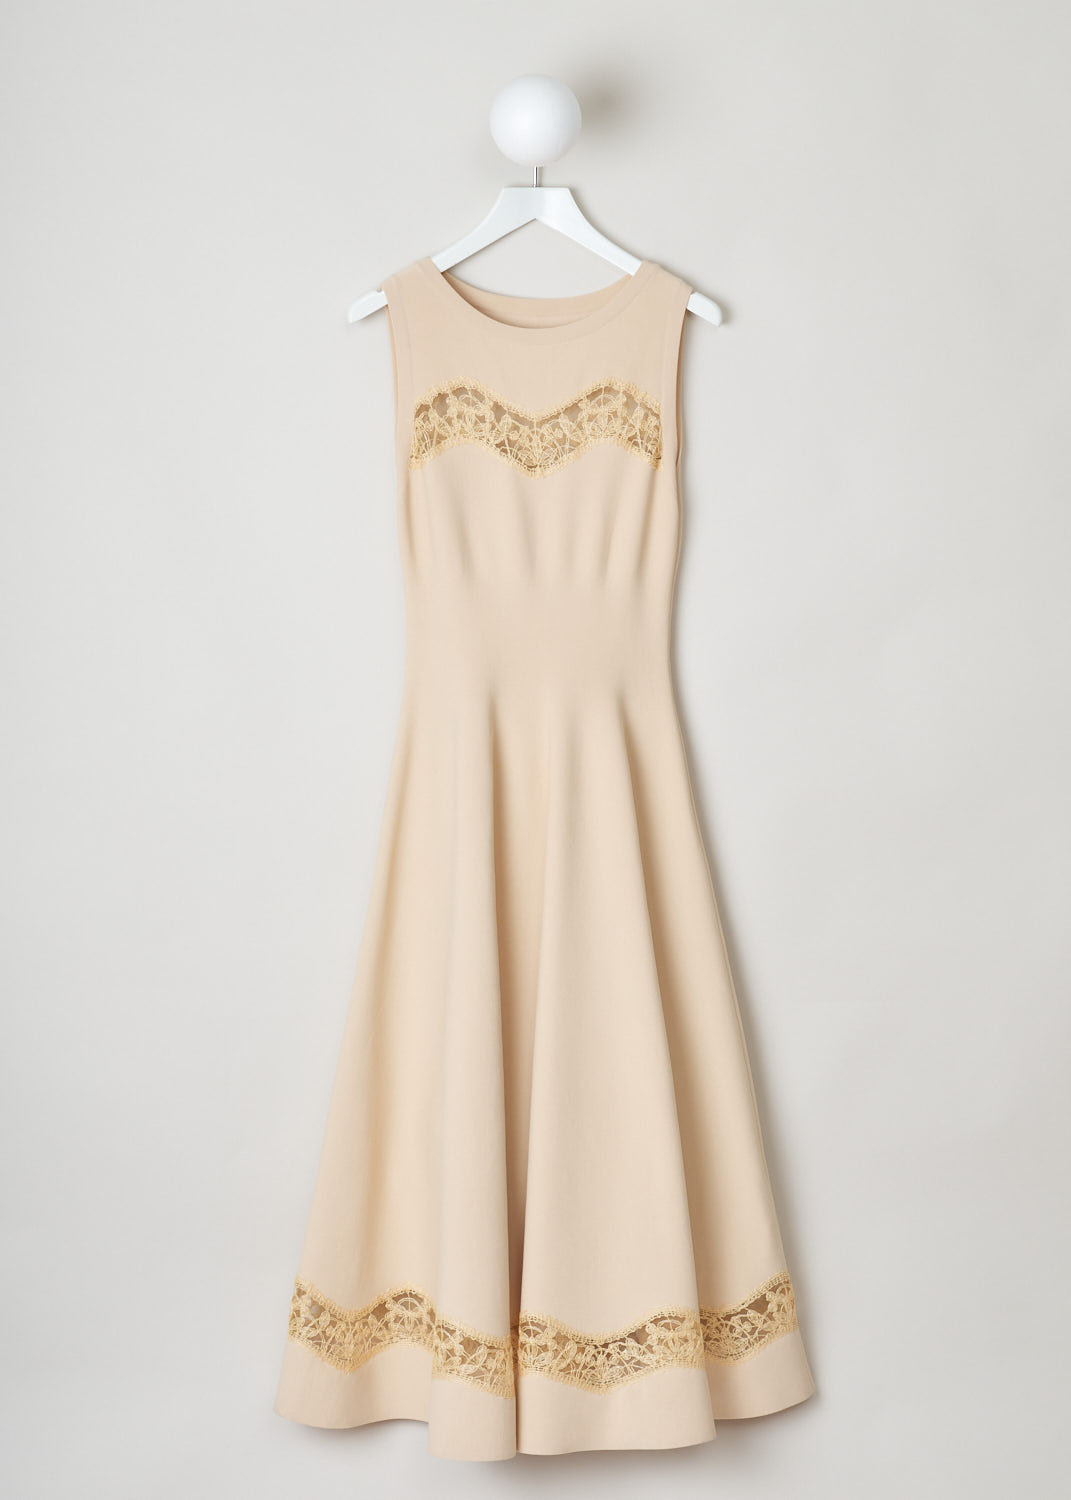 Alaïa, Max length dress with embroidered detailing, 9E9RM34LM473_robe_SM_raphia_dentelle_C120, beige, front, Max length dress featuring a fitted bodice and a skirt with flowing pleats. This model comes with round neckline and no sleeves. Lovely embroidery decorates the chest and bottom of the dress. Fastening option on this model can be found on the left side of the dress.  